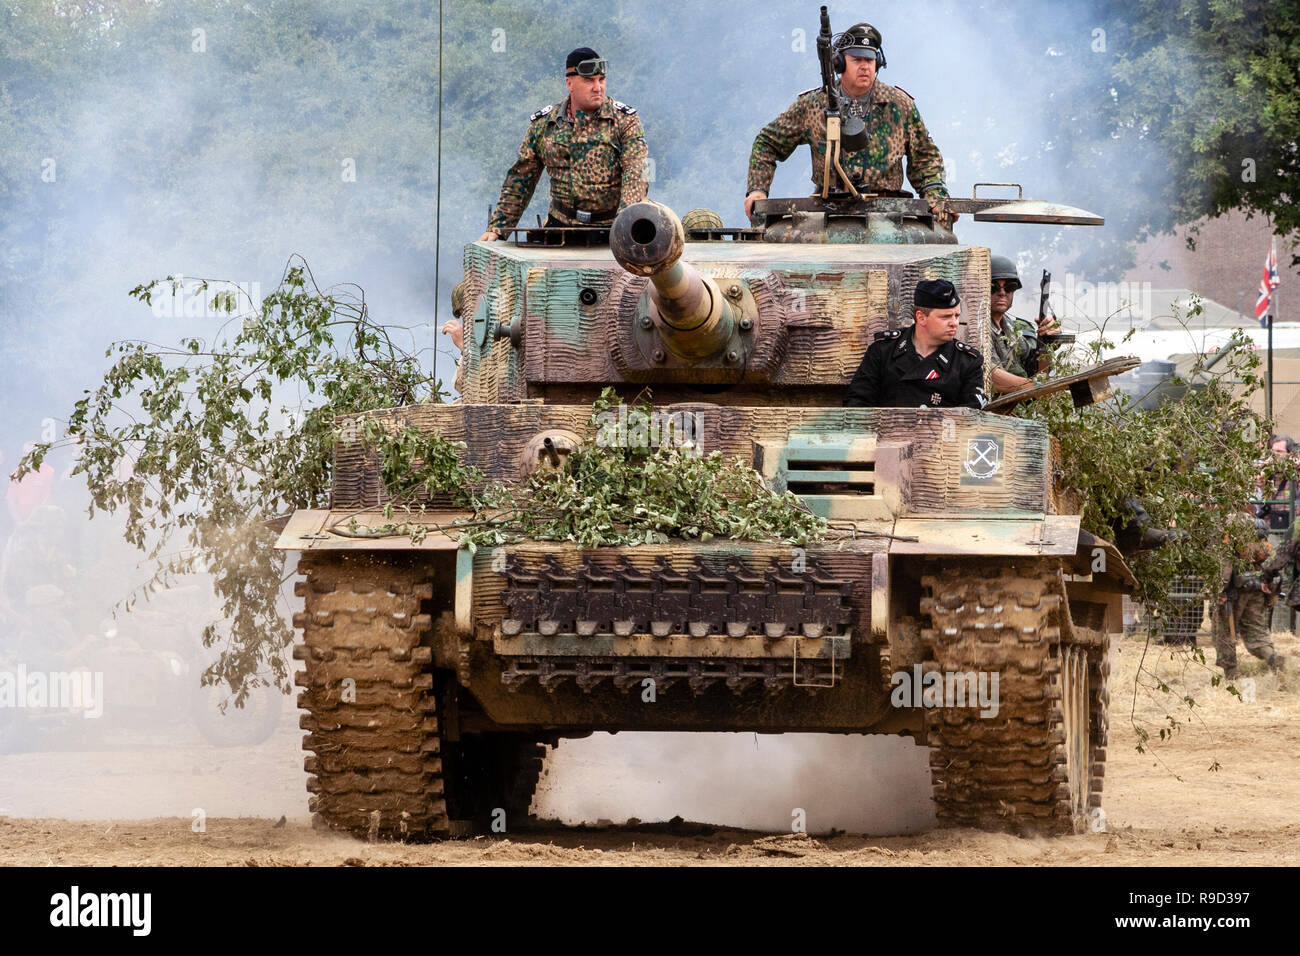 Re-enactment, War and Peace Show. German Tiger tank approaching at speed with tank commander in turret. Motion blur on tracks, dust behind tank. Stock Photo